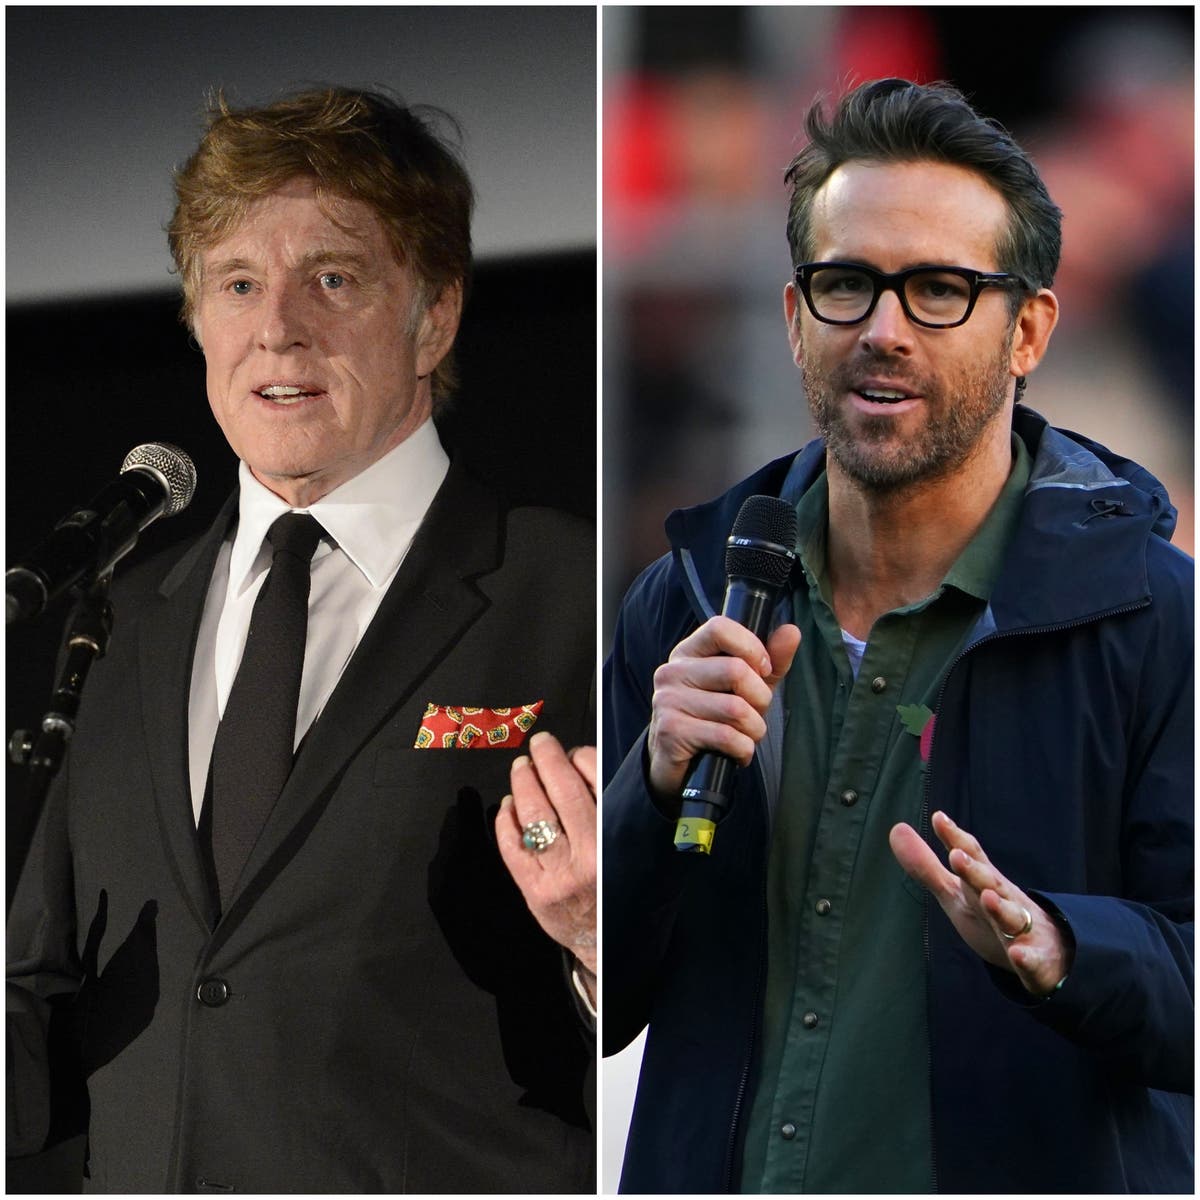 Robert Redford and Ryan Reynolds continue feud to be Betty White’s ‘crush’